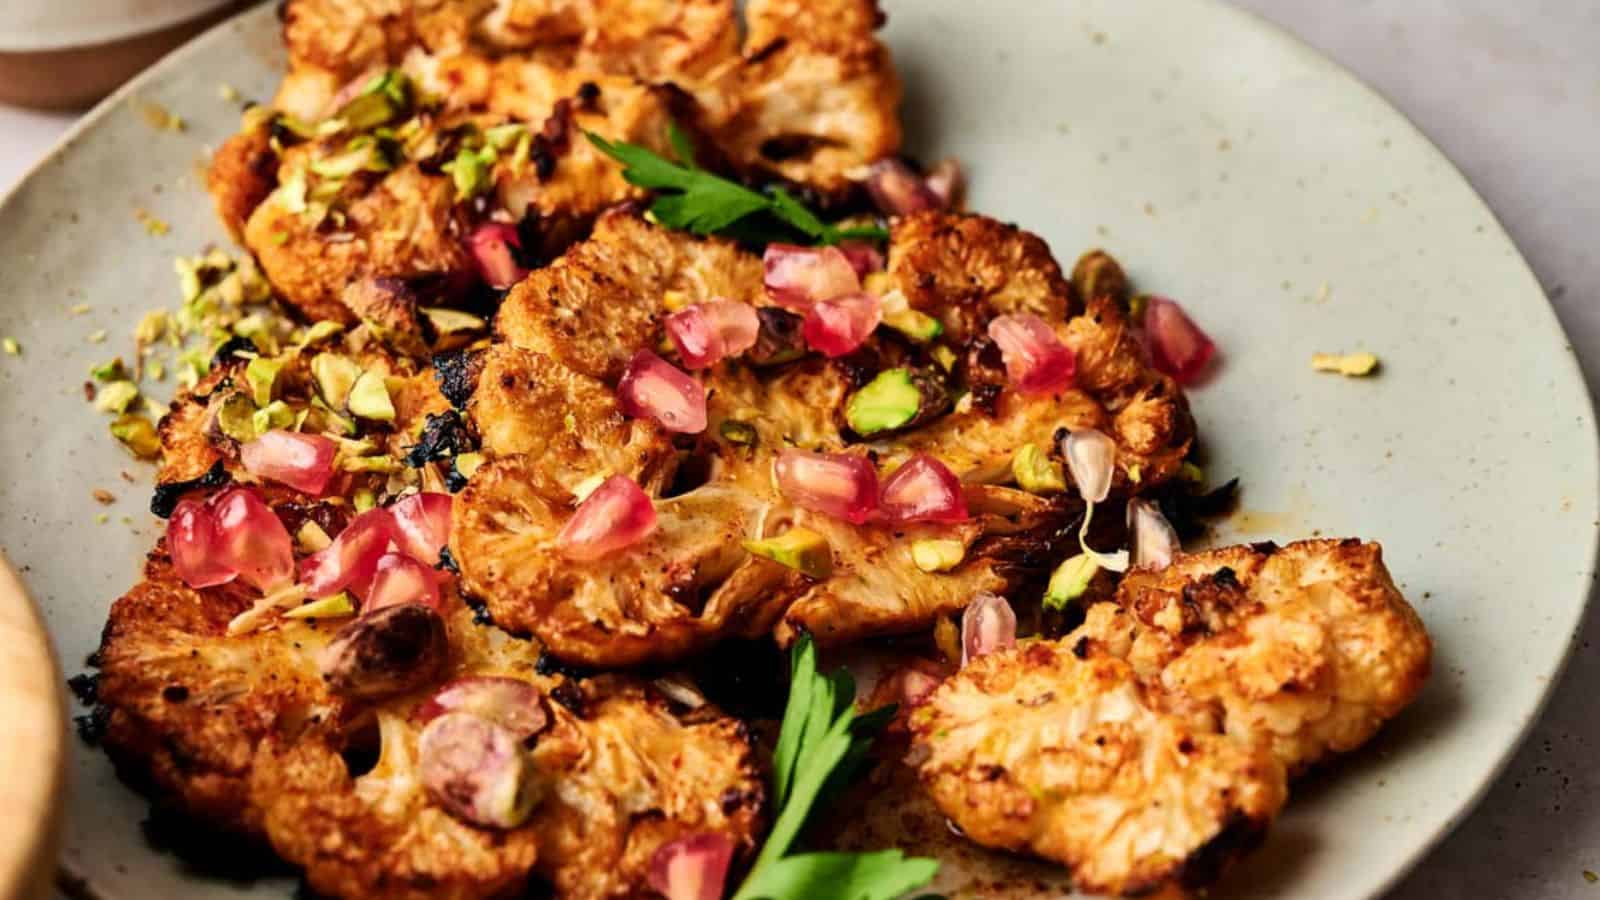 A plate of roasted cauliflower steaks garnished with chopped pistachios, pomegranate seeds, and fresh parsley.